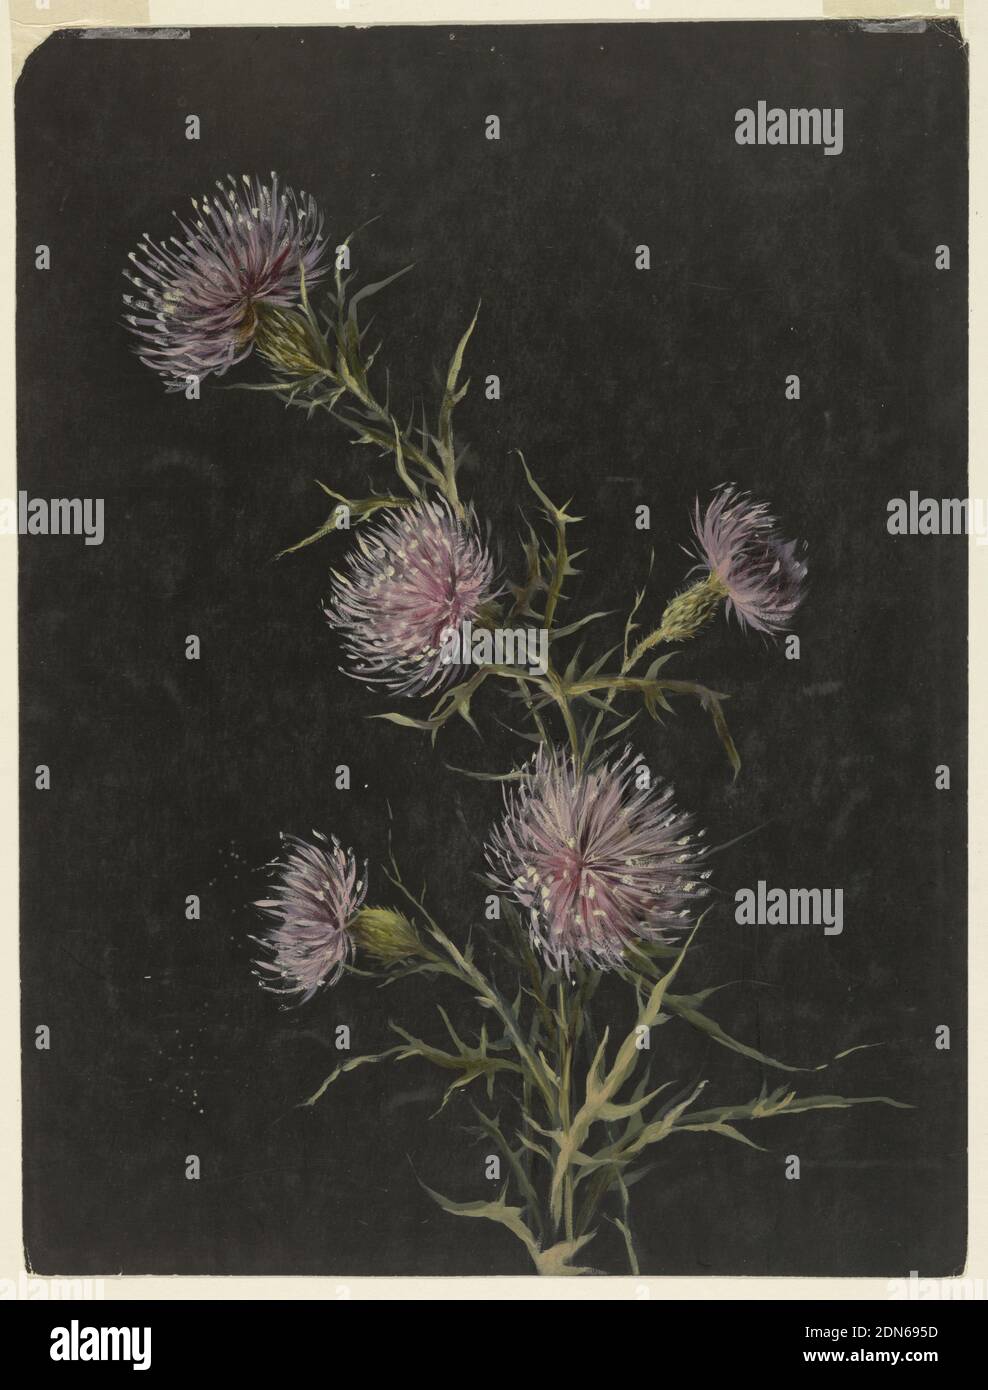 Study of Thistles, Sophia L. Crownfield, (American, 1862–1929), Brush and oil on black paper, Vertical sheet depicting a stalk of thistles with five blossoms and leaves., USA, ca. 1890, nature studies, Drawing Stock Photo